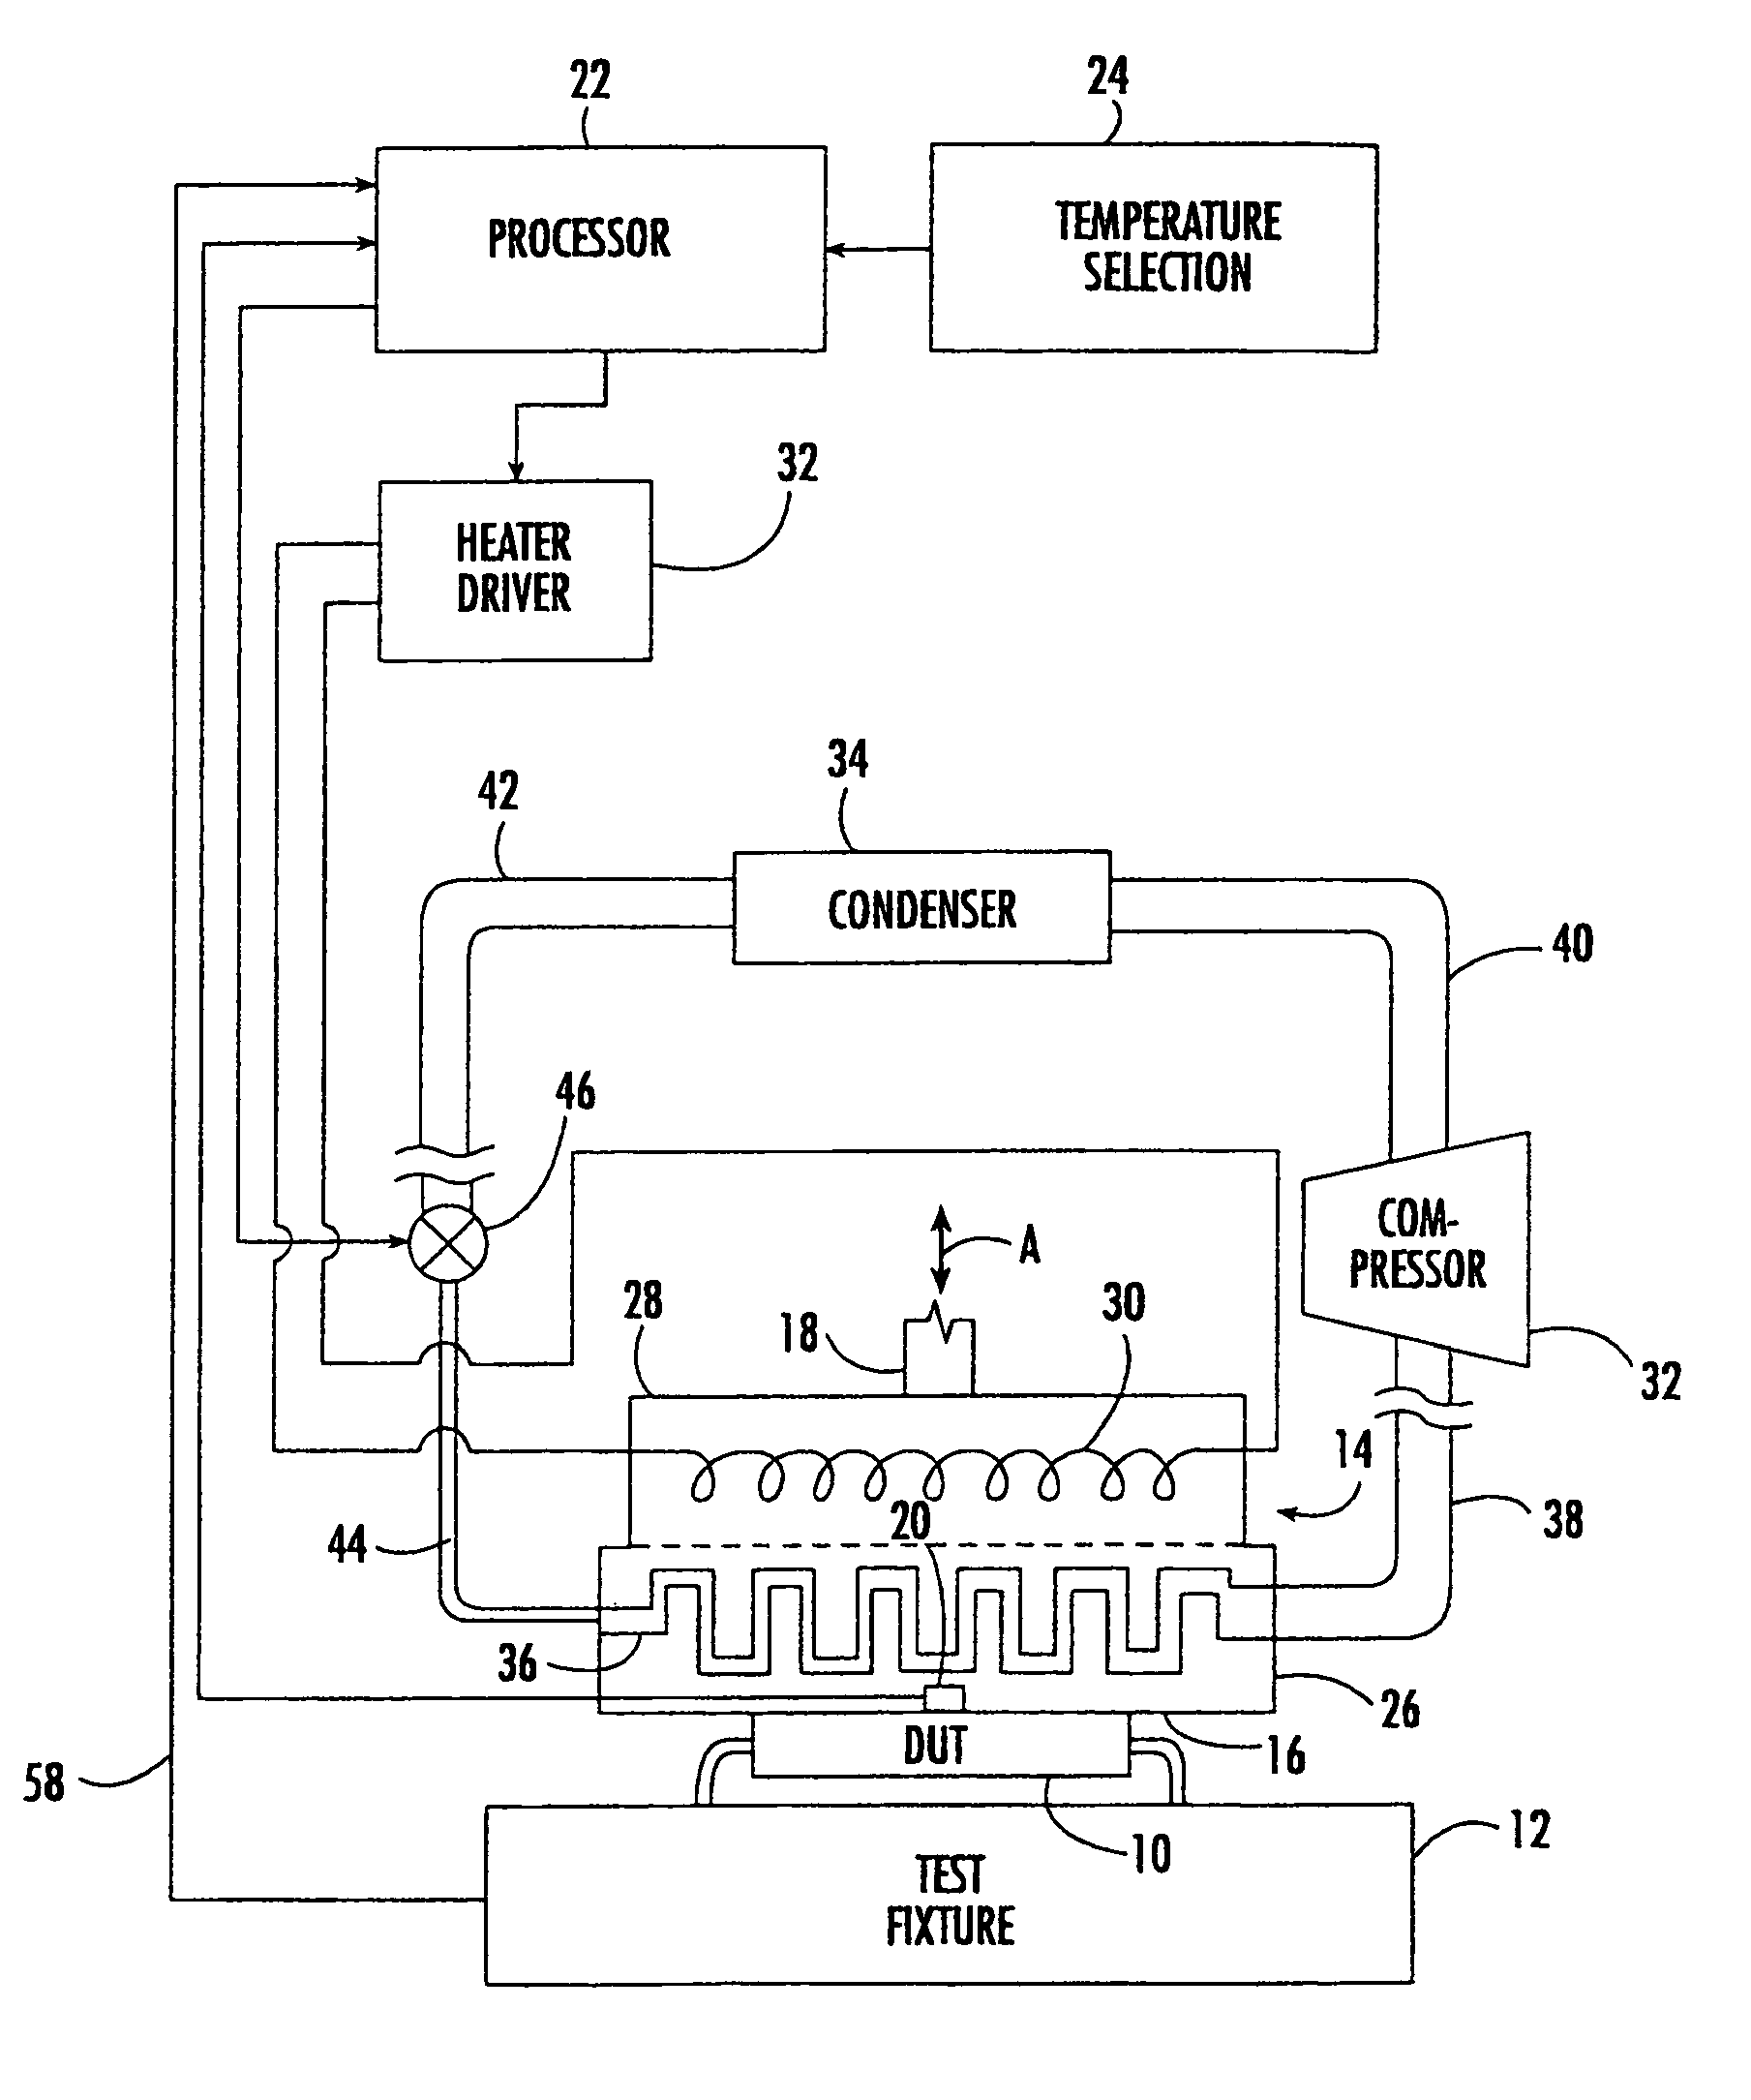 Apparatus and method for controlling the temperature of an electronic device under test